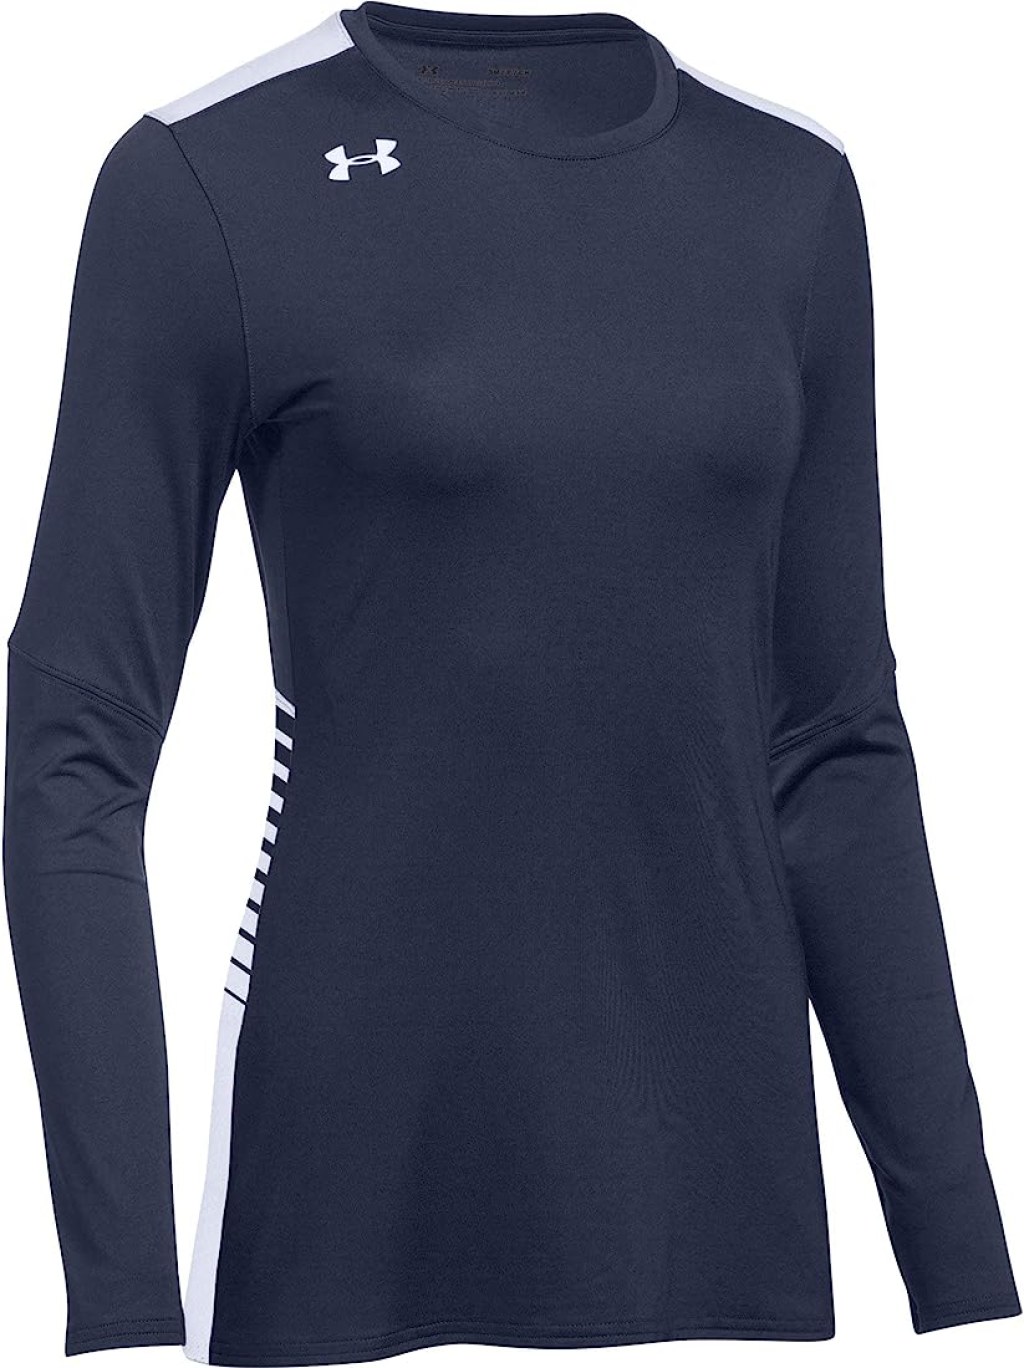 Picture of: Under Armour Women’s UA Endless Power Volleyball Jersey Long Sleeve Top :  Amazon